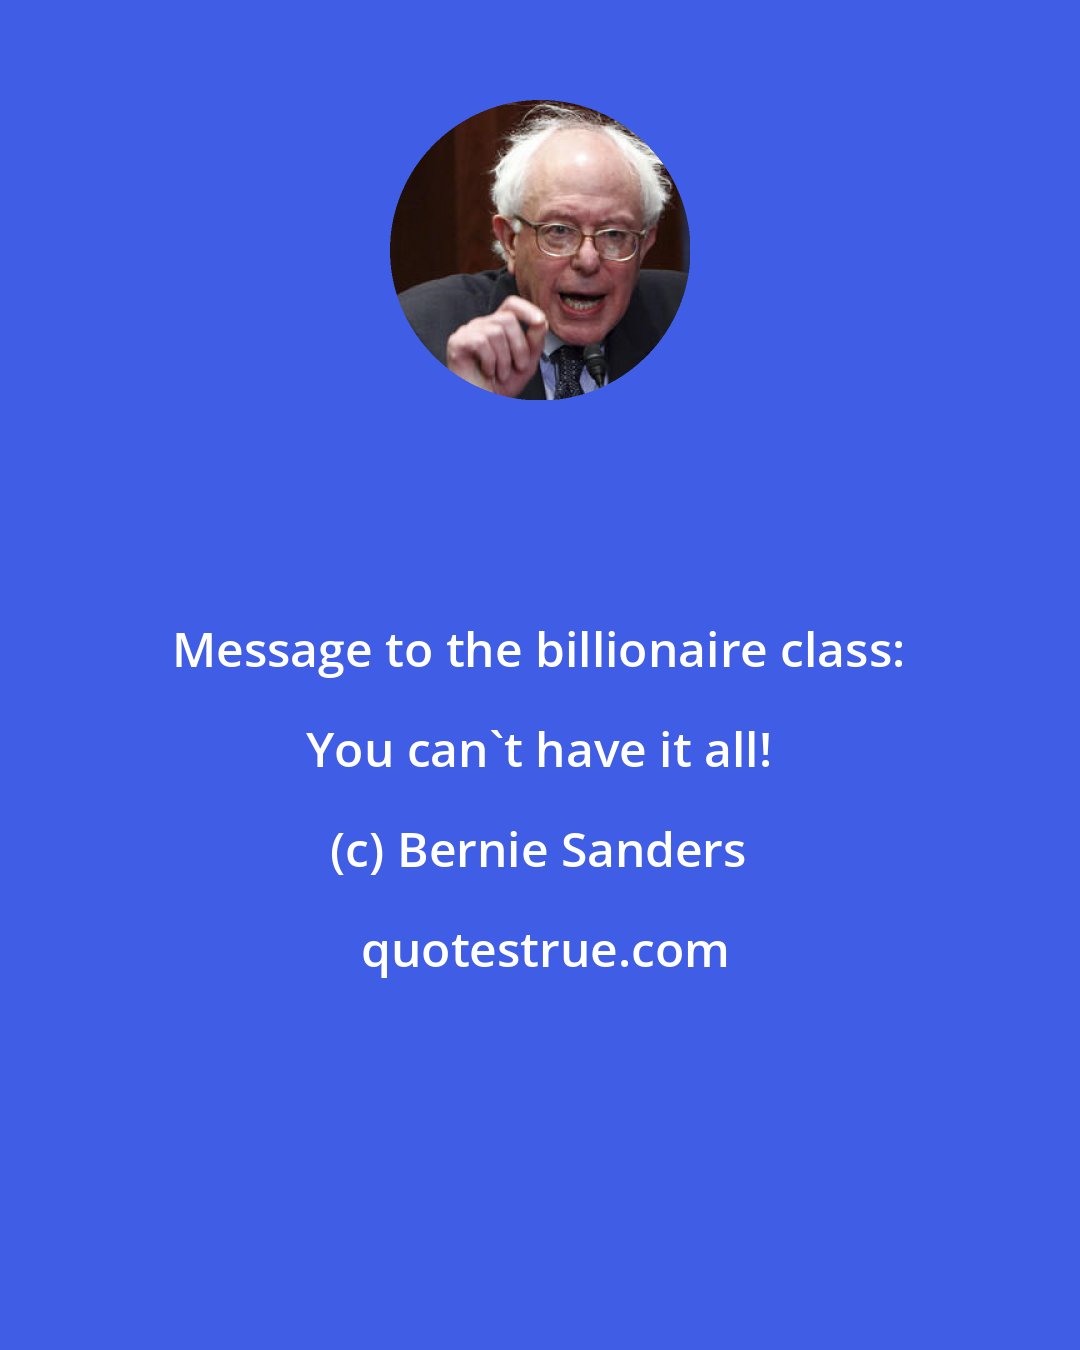 Bernie Sanders: Message to the billionaire class: You can't have it all!